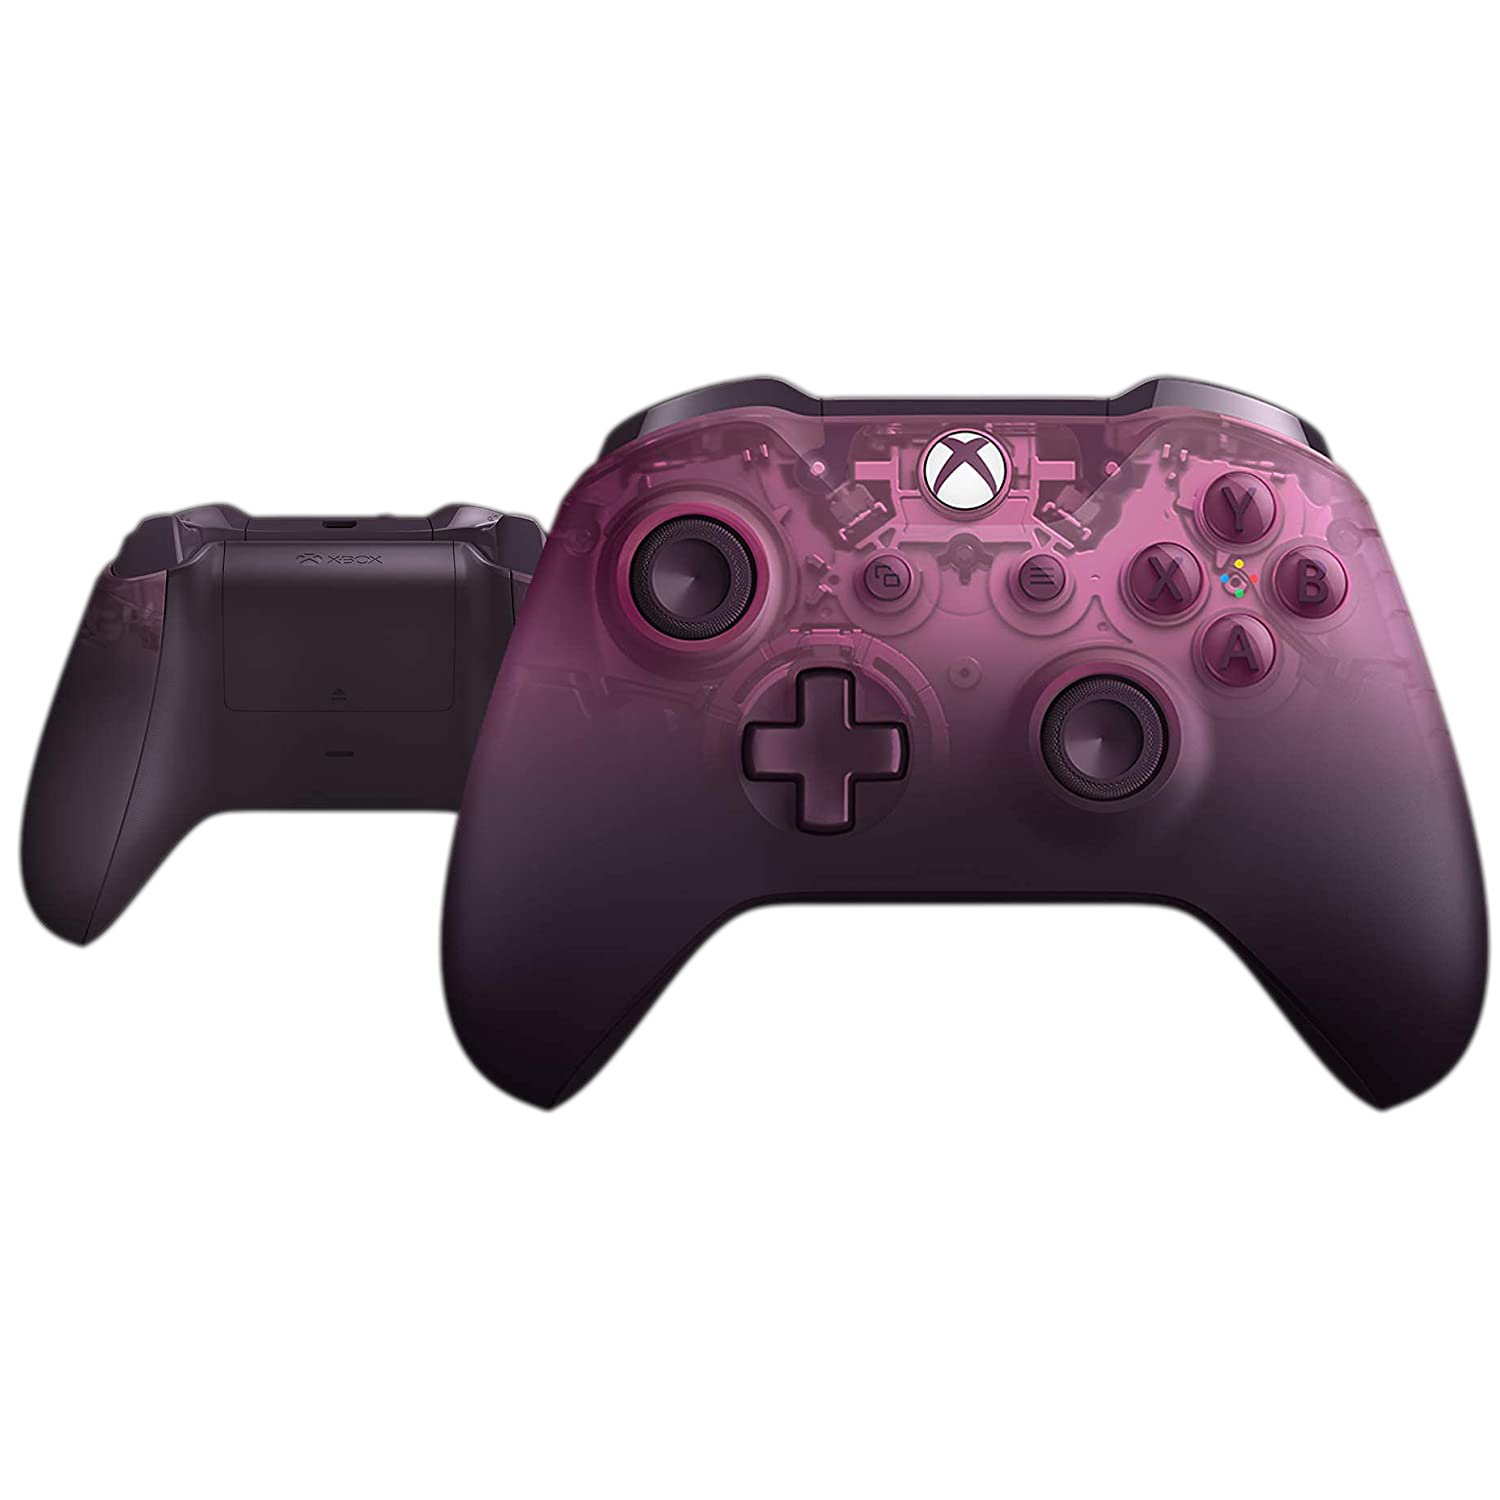 Microsoft-Official-Xbox-Controller-Phantom-Magenta-Limited-Edition-12-Months-Warranty-6